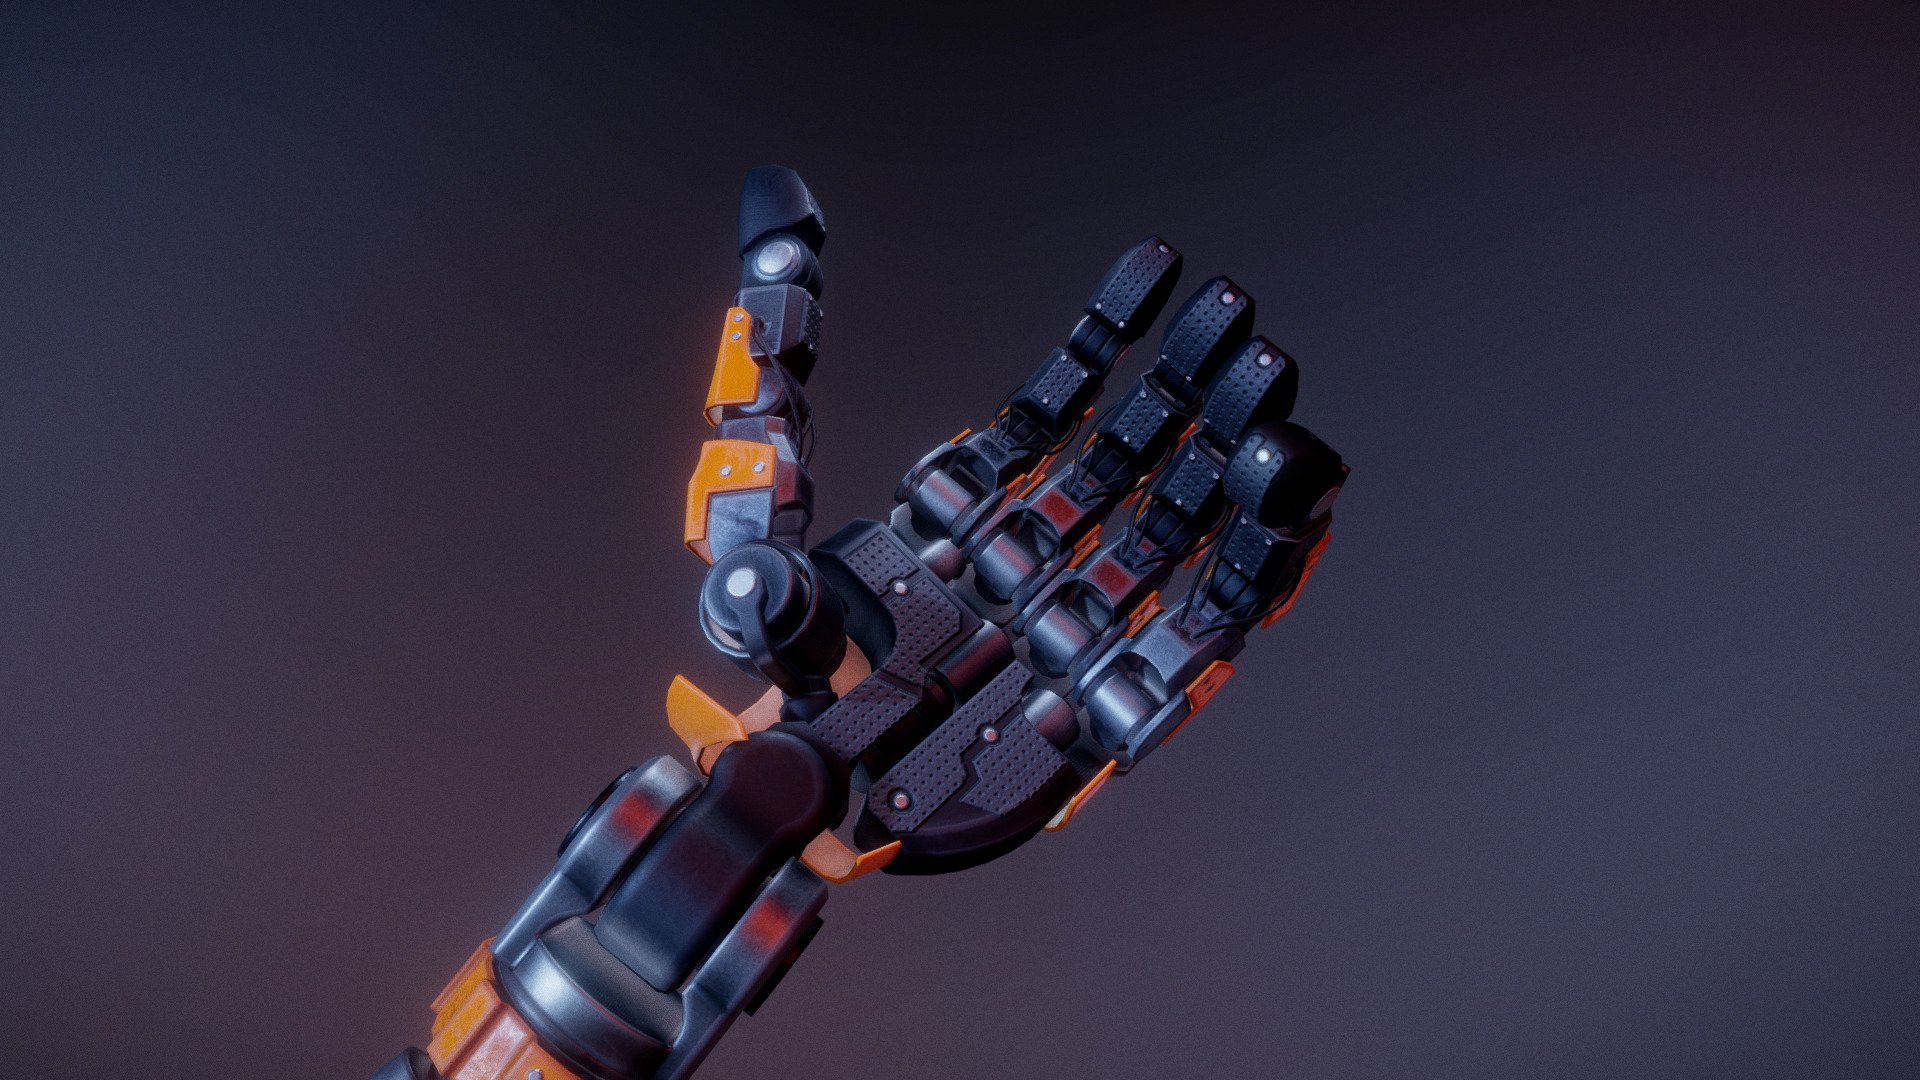 This industrial robot arm was designed in 3D while at the modelling stage. I wanted it to look stylish but at the same time mechanical and not too futuristic. Honestly, I'm very happy how it turned out.
Modelled in Maya, polished and refined in Blender, normal weighted with YAVNE, textured in Substance Painter 3d model